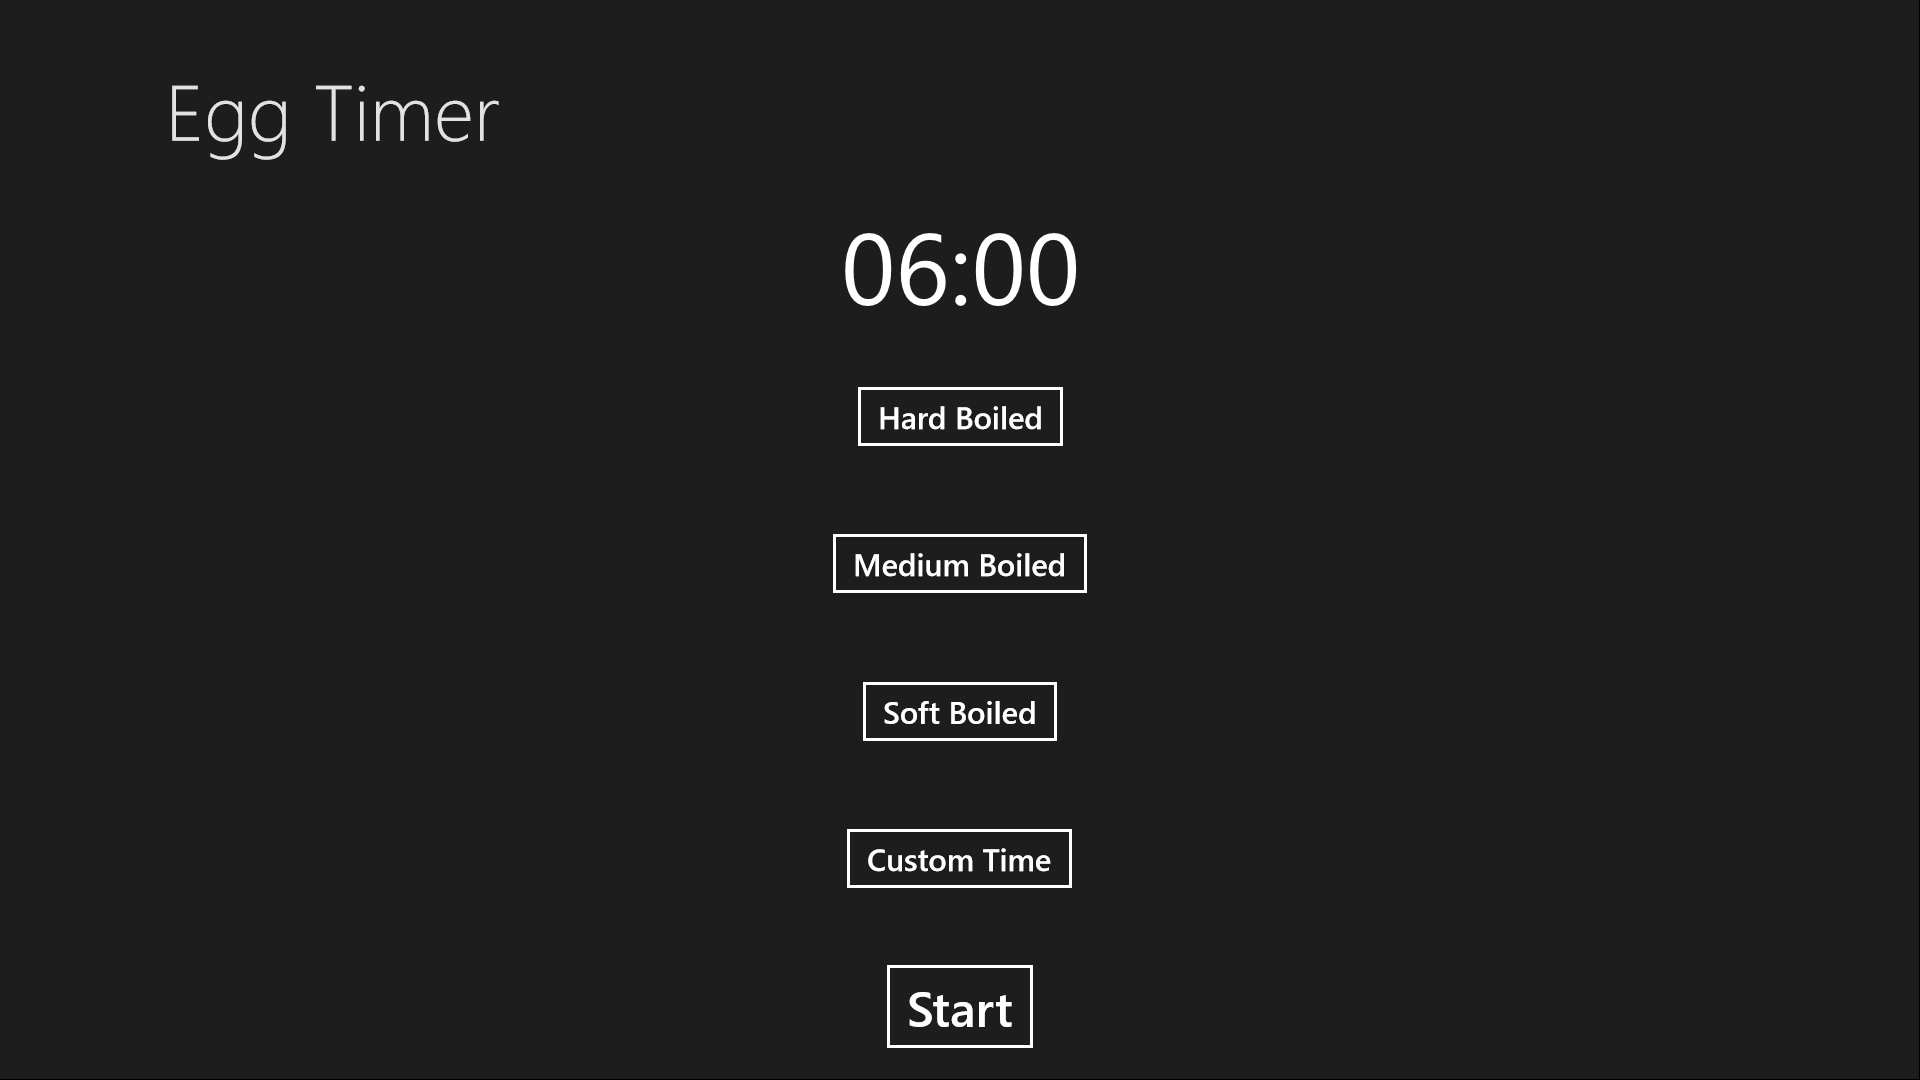 Choose a preset boiling time